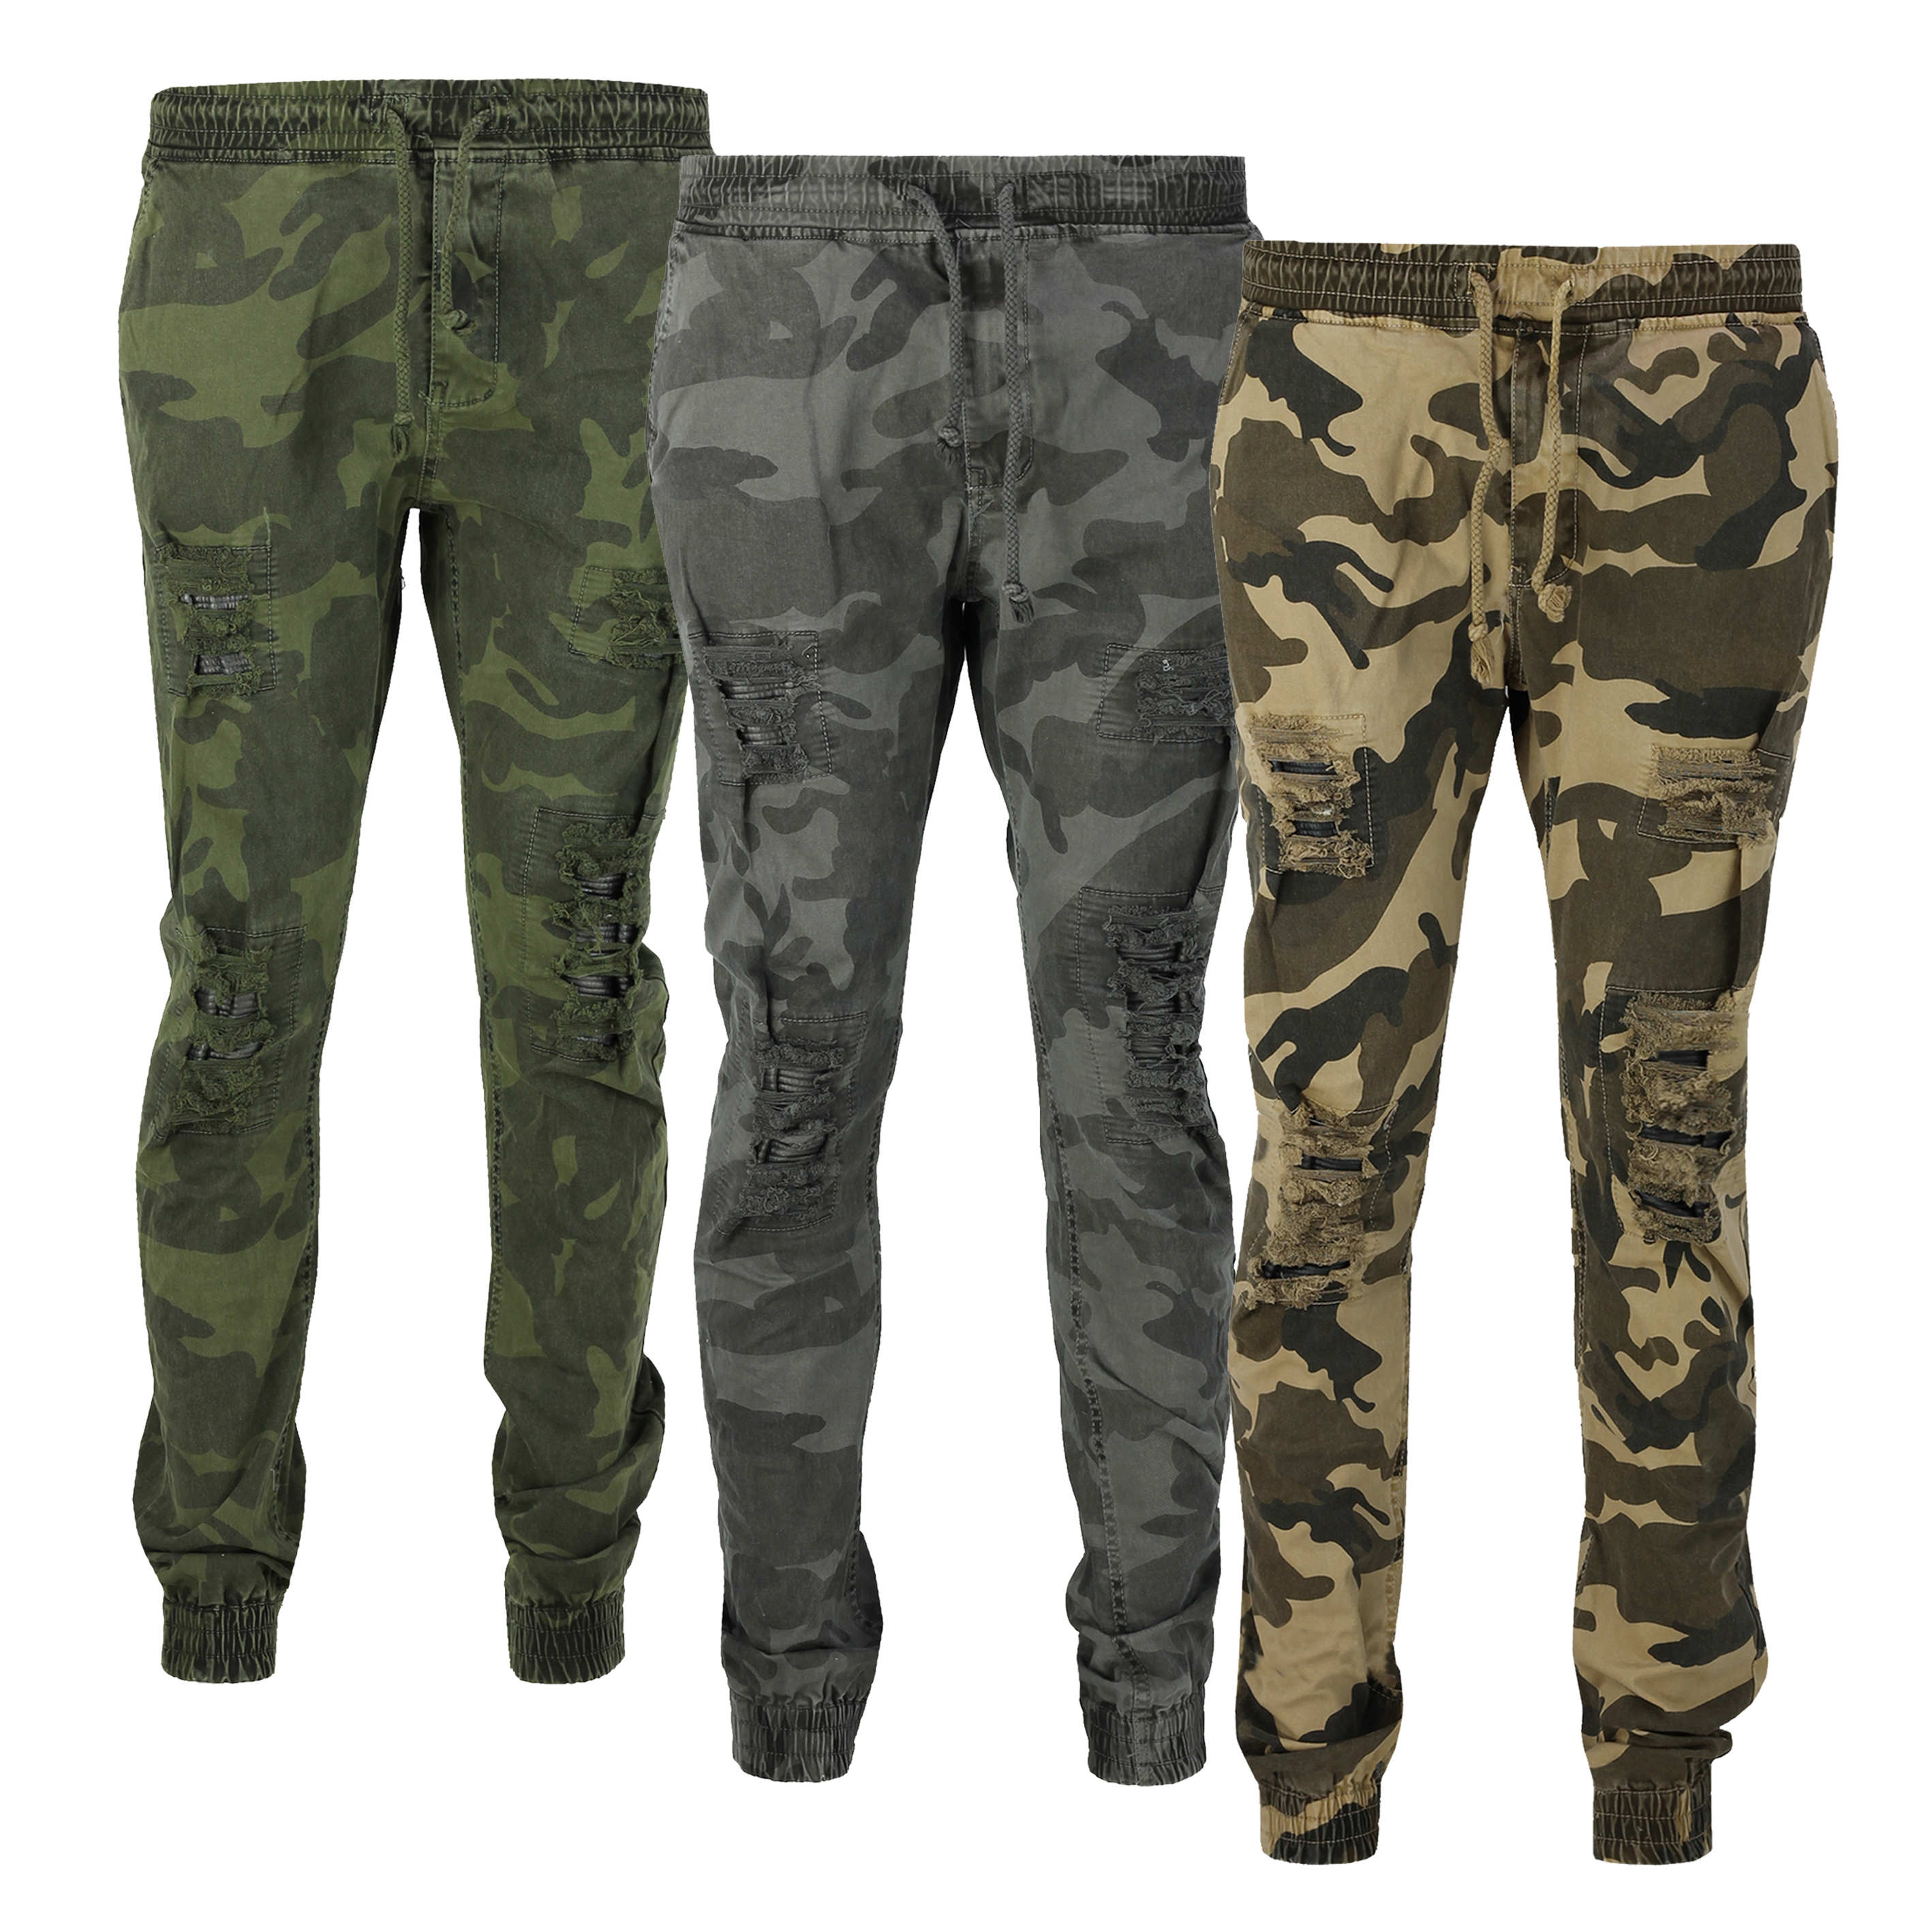 army pants joggers